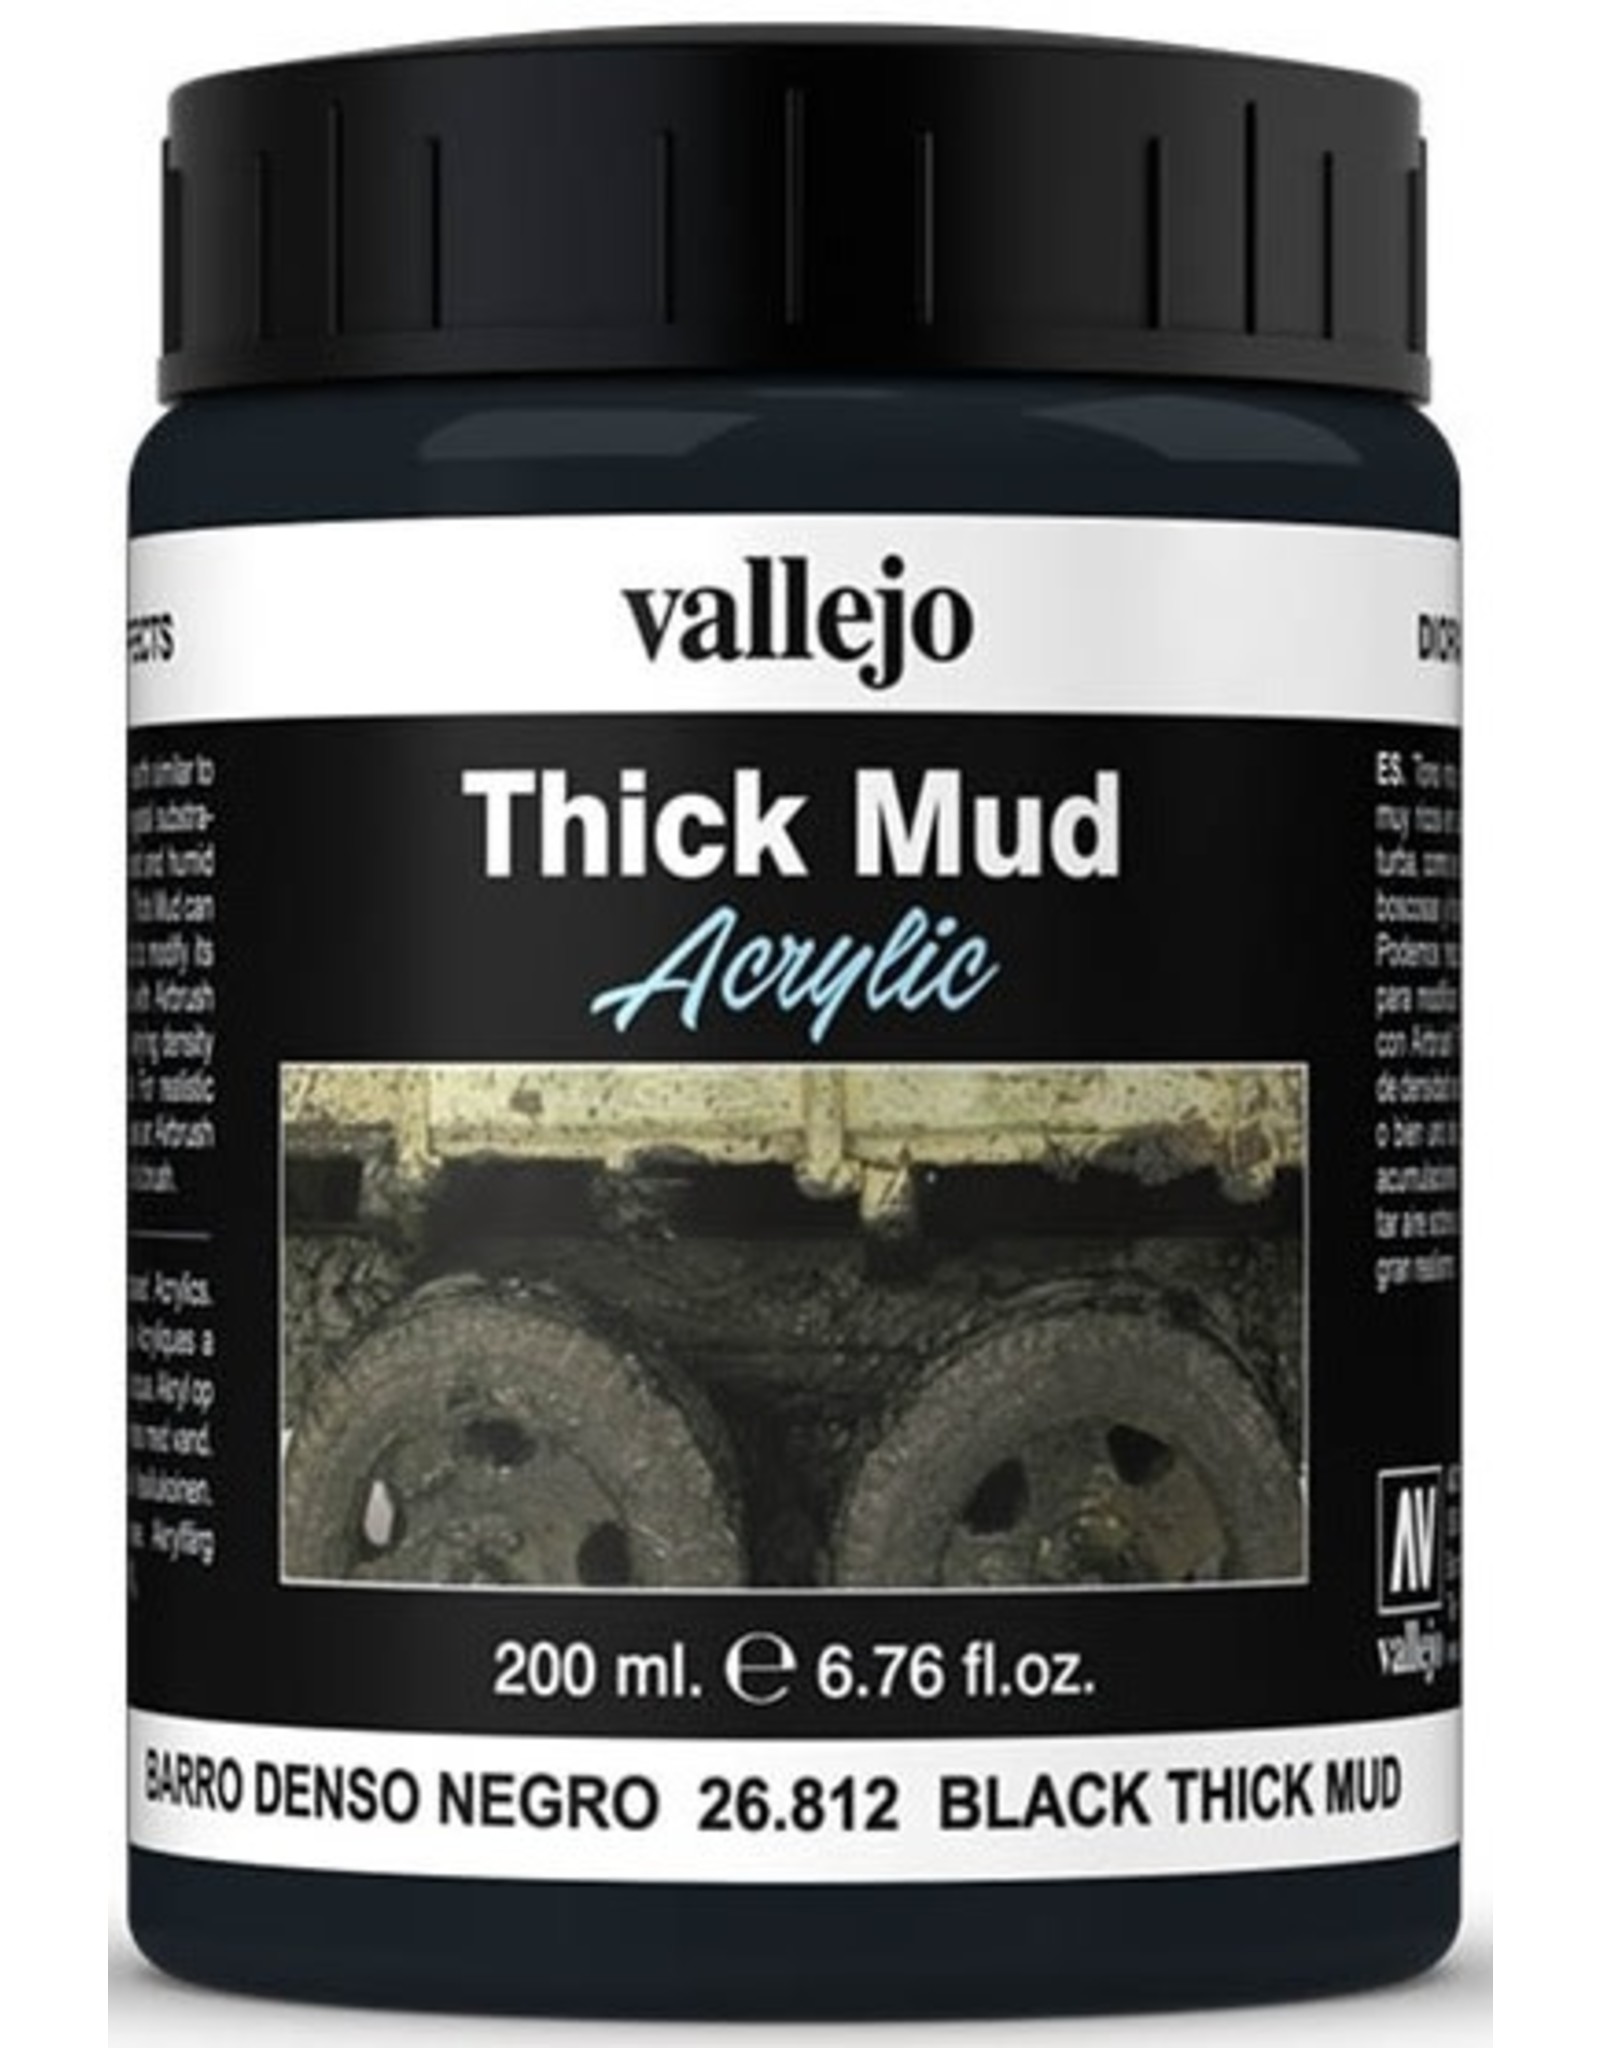 Vallejo Thick Mud Black Earth